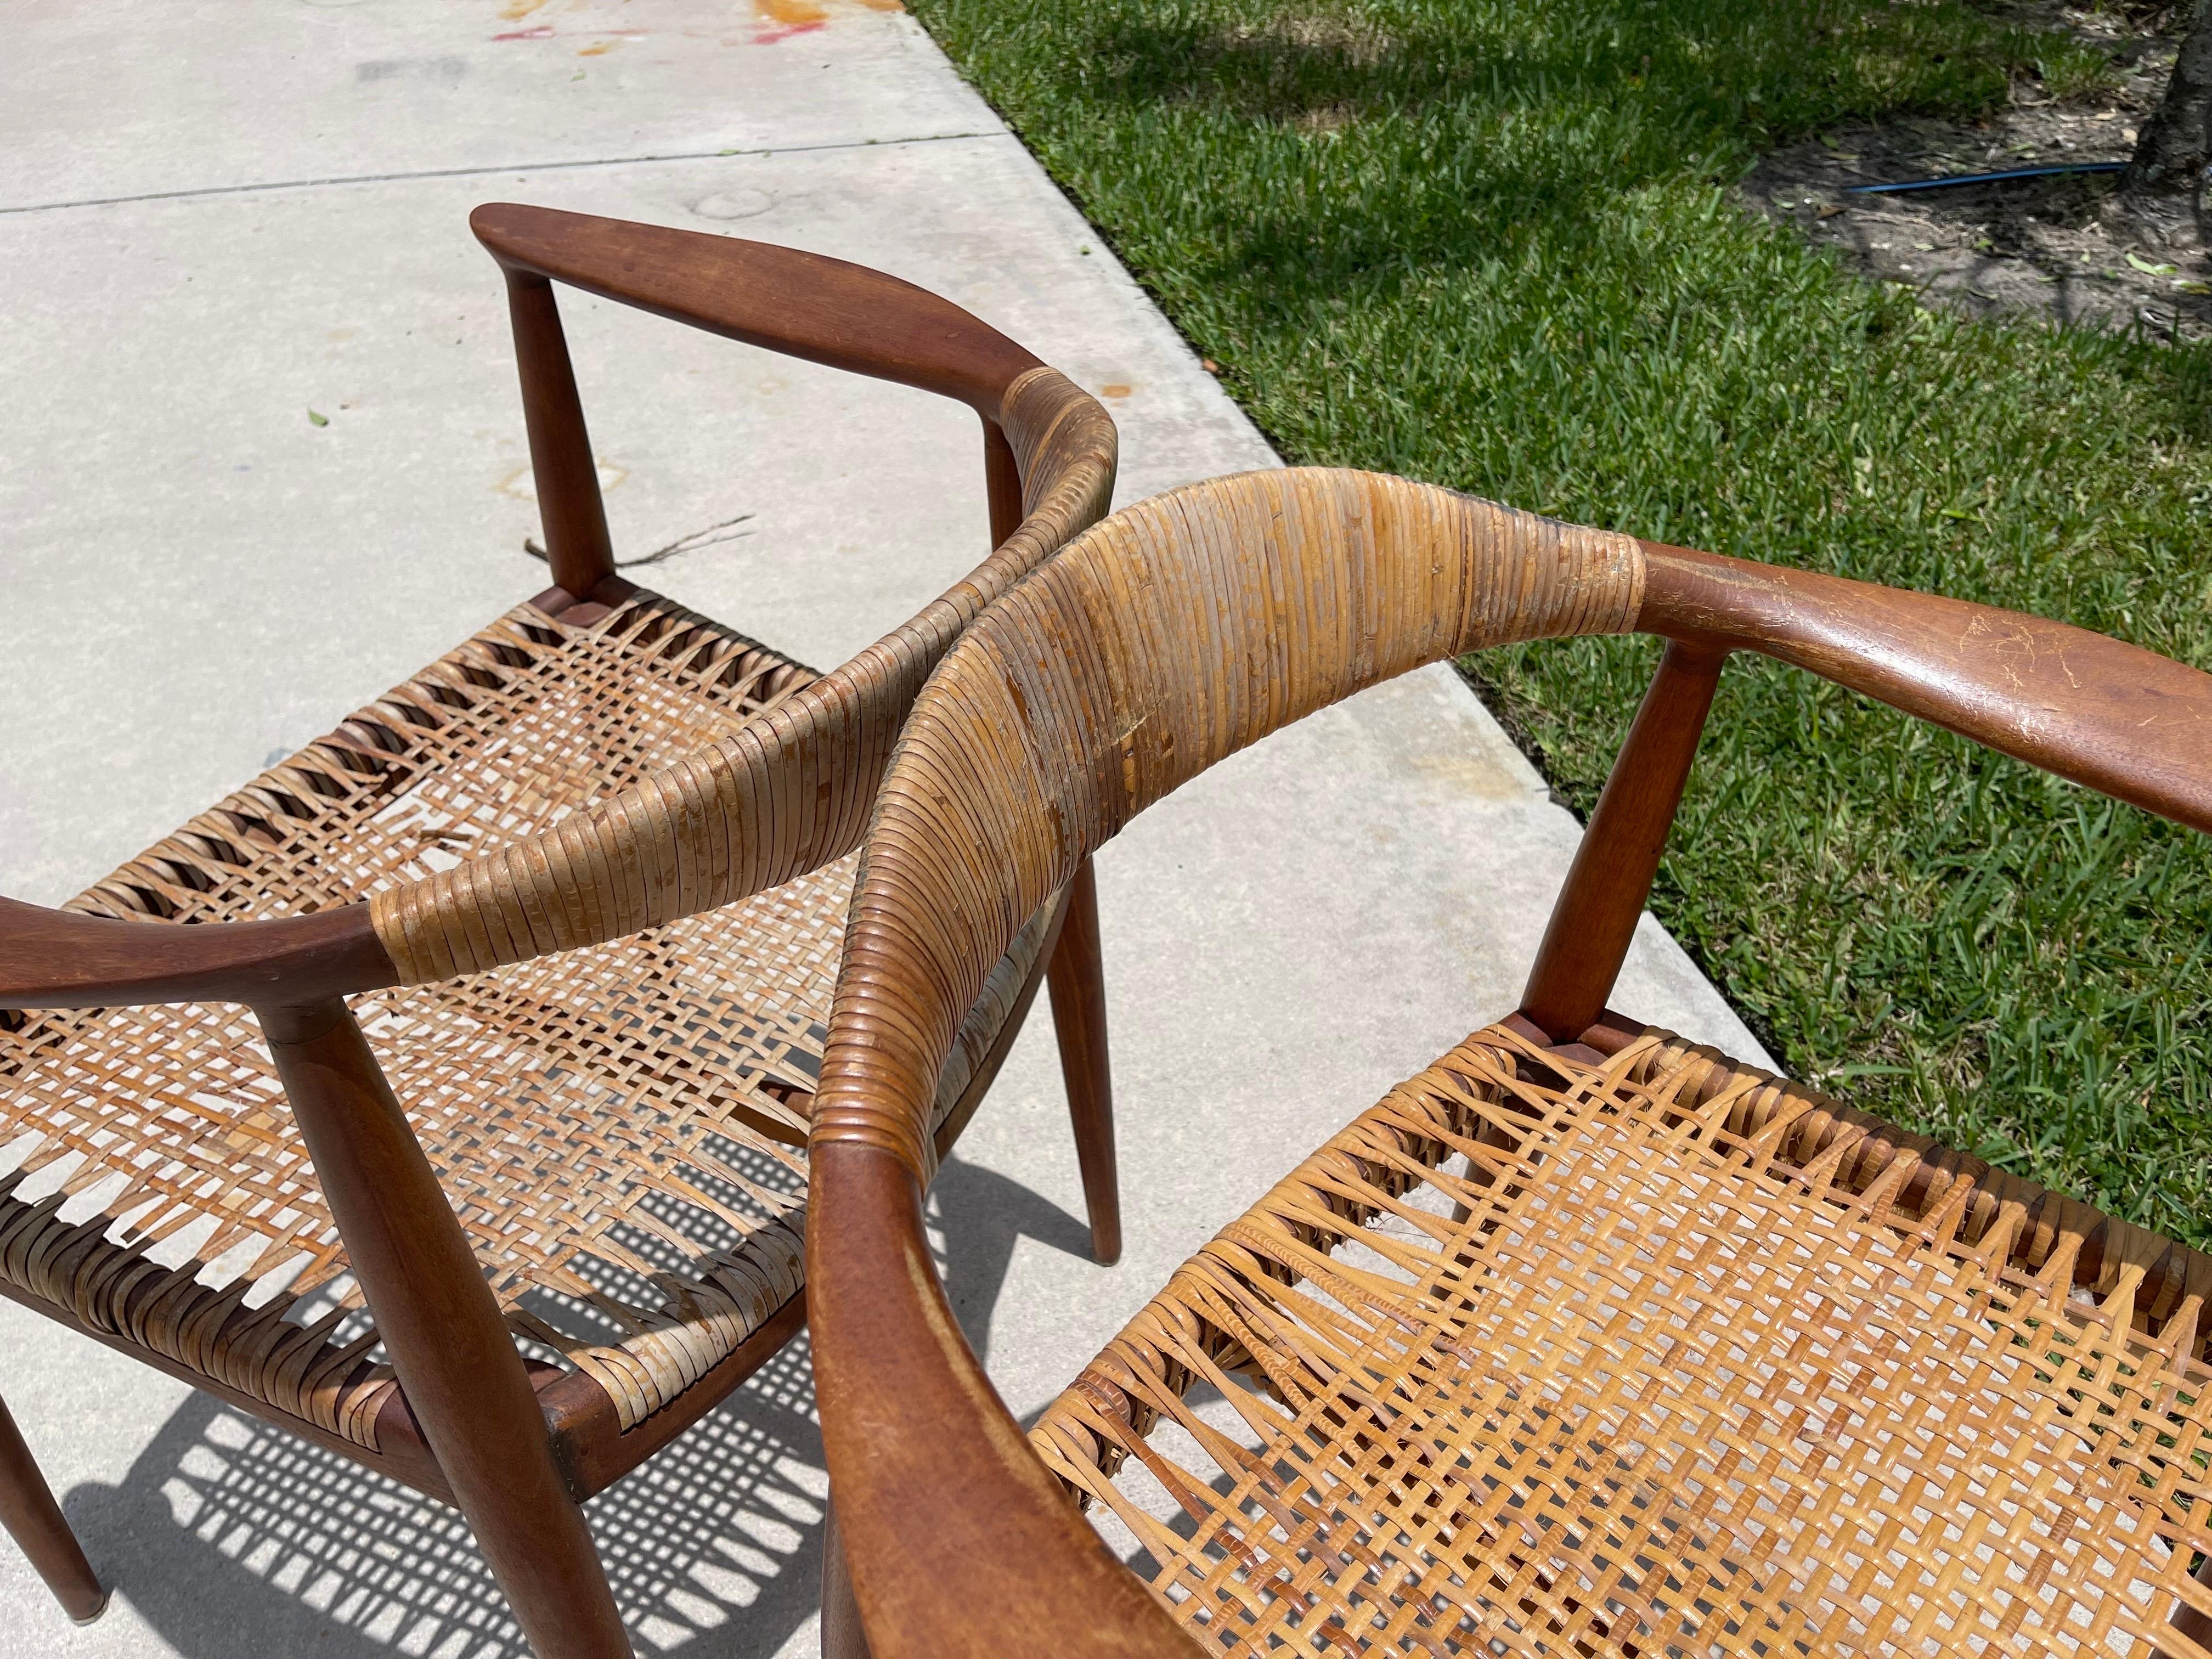 Hans Wegner “The Chair” Early Example Teak, Cane Armchairs, a Pair For Sale 2